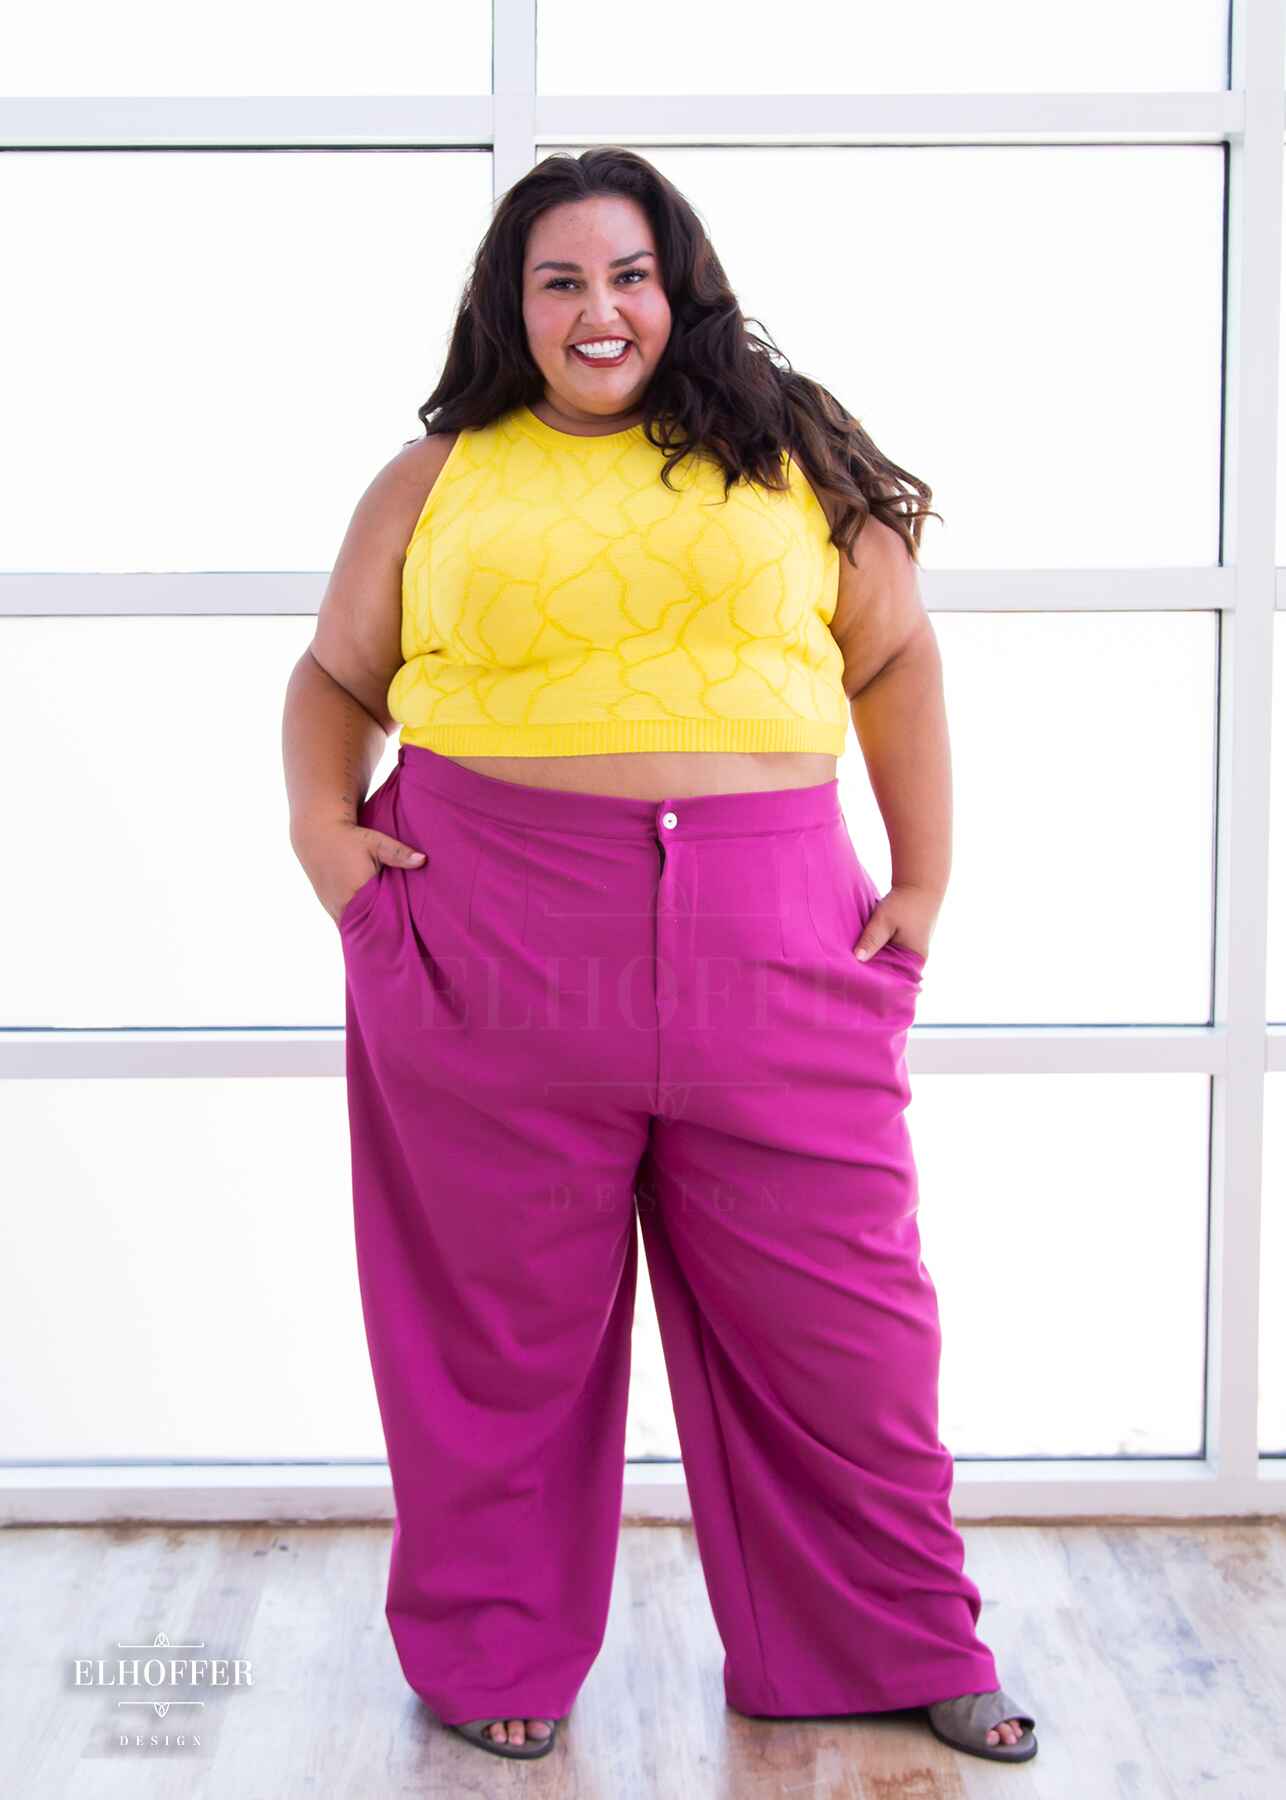 Kristen, an olive skinned 3xl model with long dark brown wavy hair, is smiling while wearing a bright yellow sleeveless knit crop top with a butterfly wing textured pattern.  She paired the crop top with pink trousers.